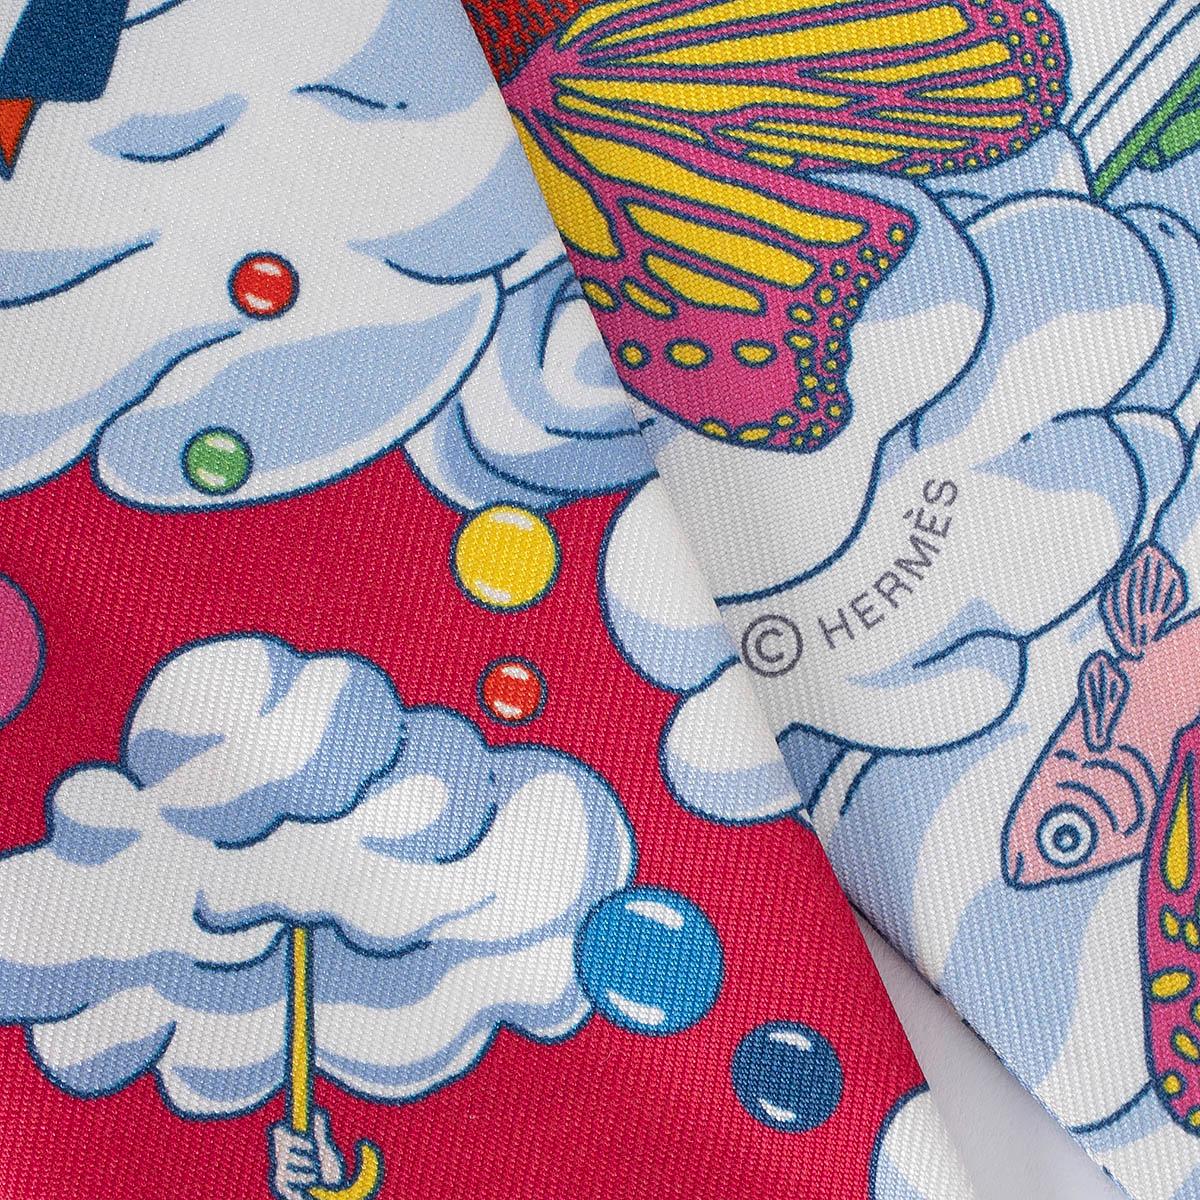 HERMES silk SUR MON NUAGES Twilly Scarf Fuchsia Bleu Multicolore In Excellent Condition For Sale In Zürich, CH